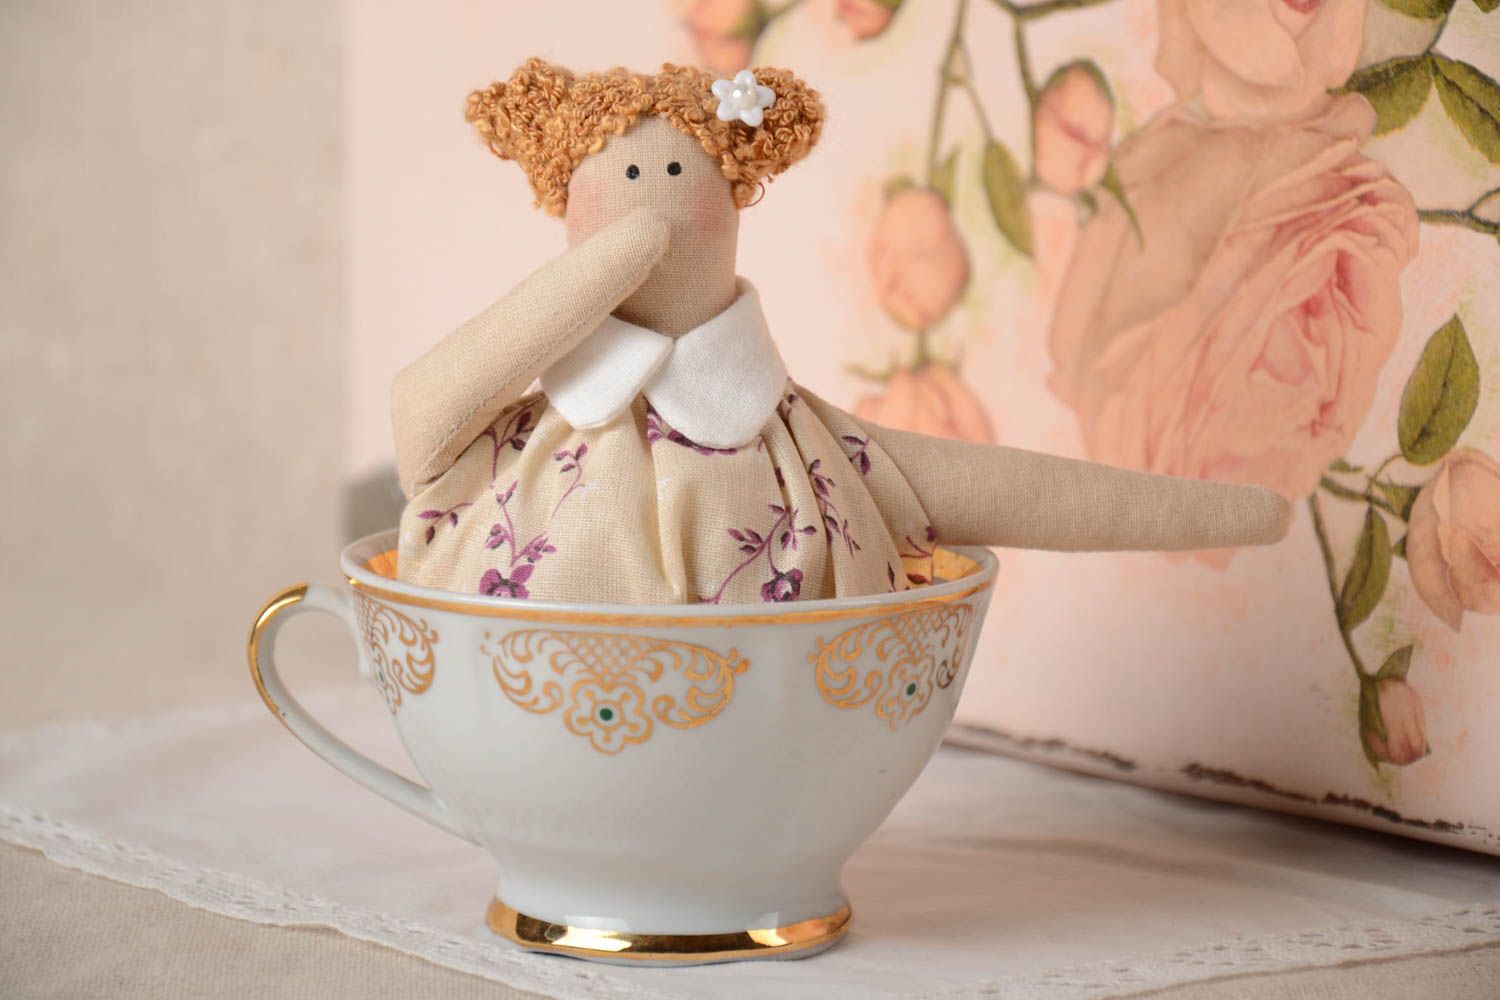 Small handmade decorative doll soft toy for cup kitchen interior decorating photo 1